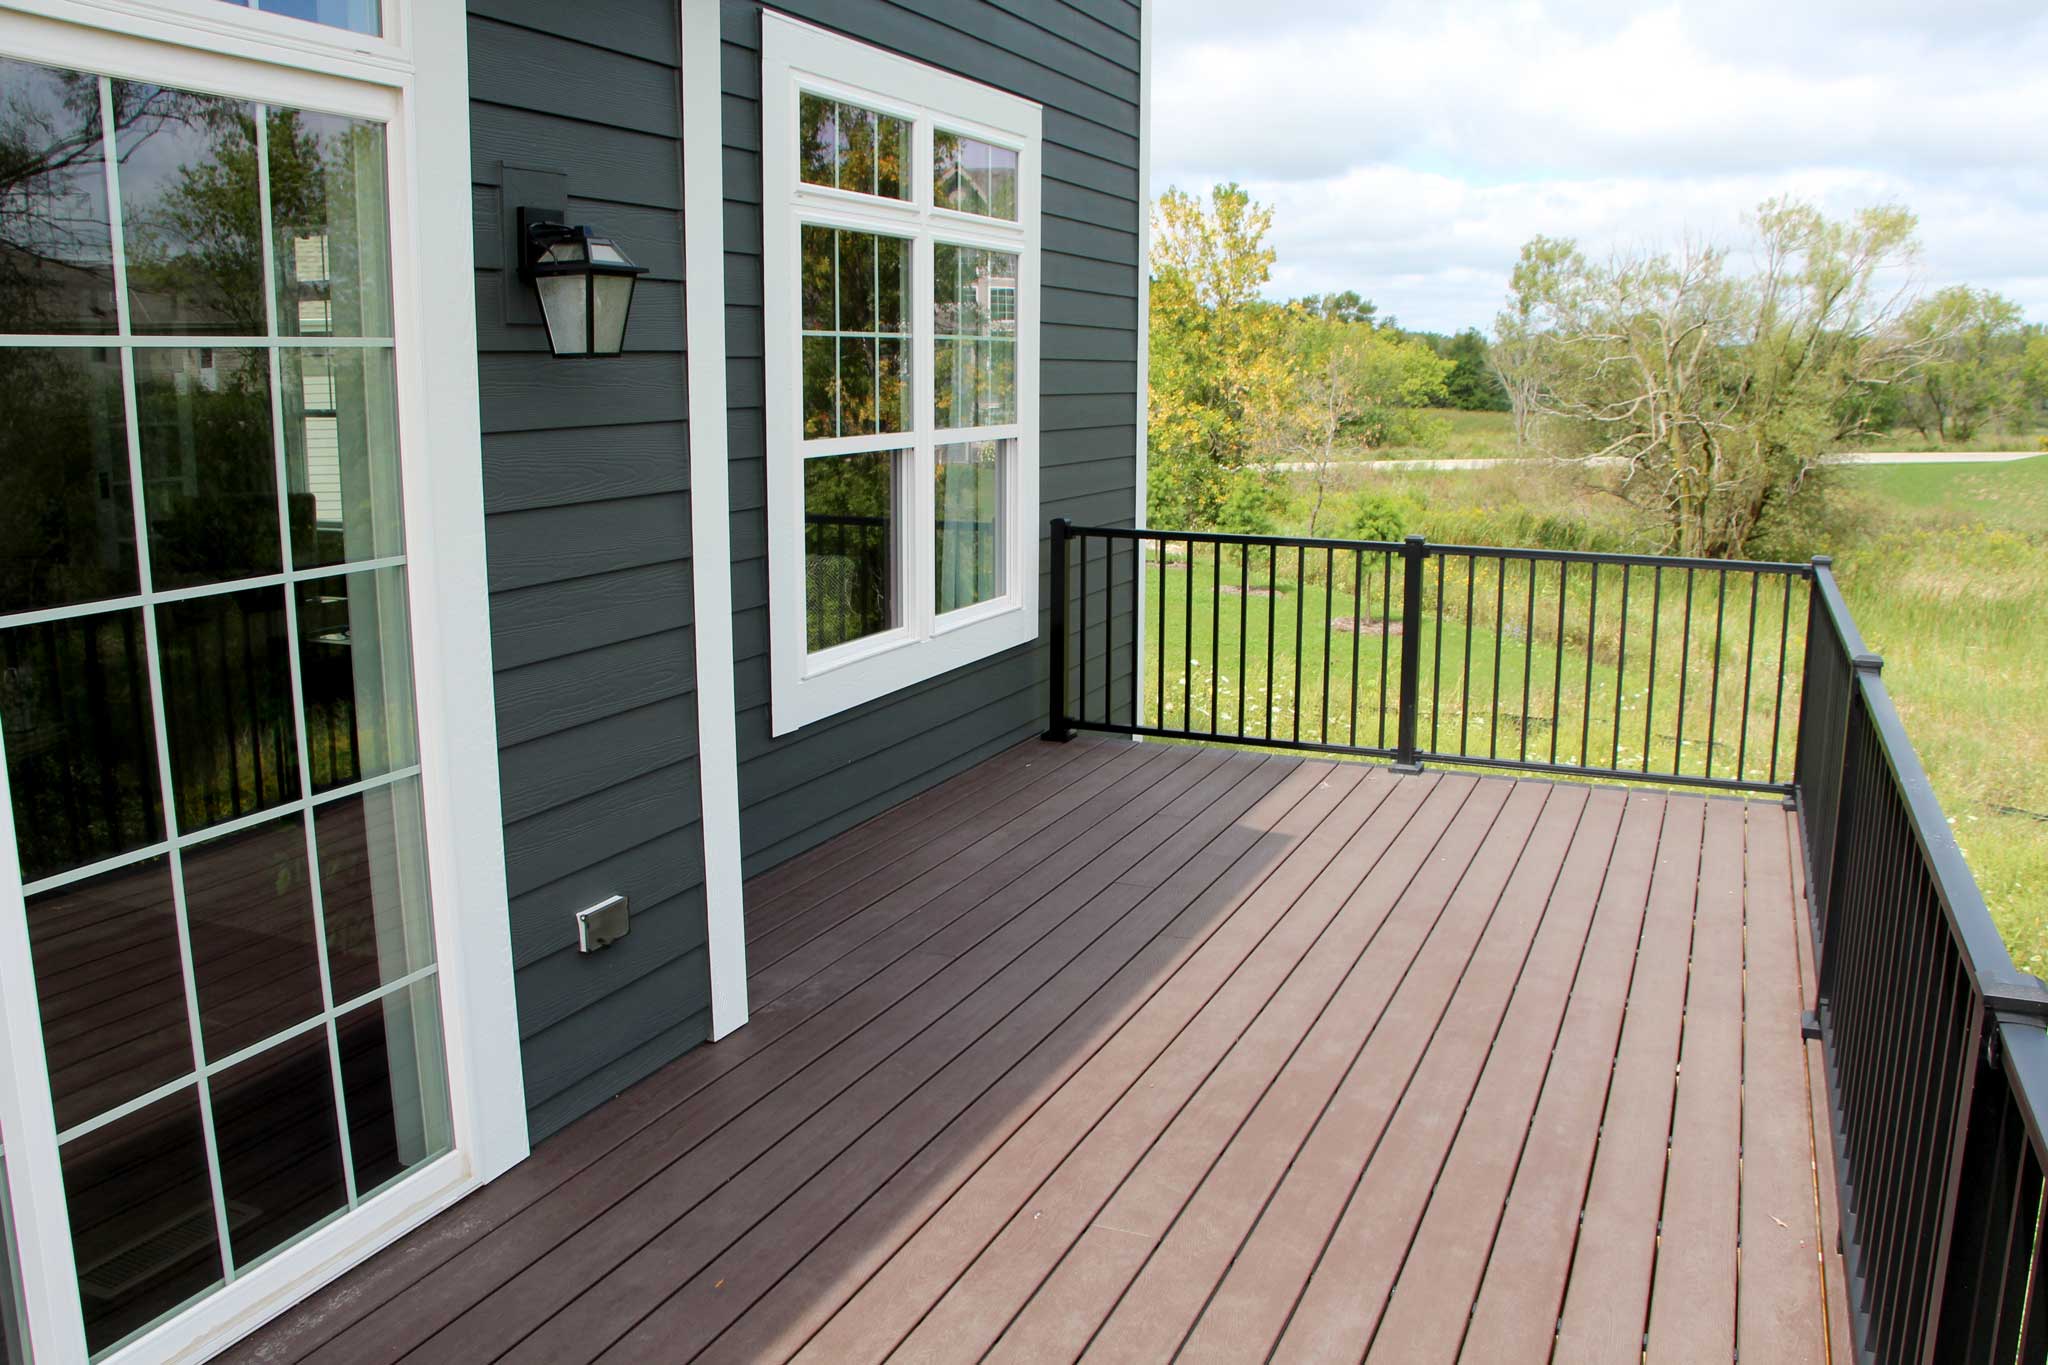 The Emerson model home exterior deck view